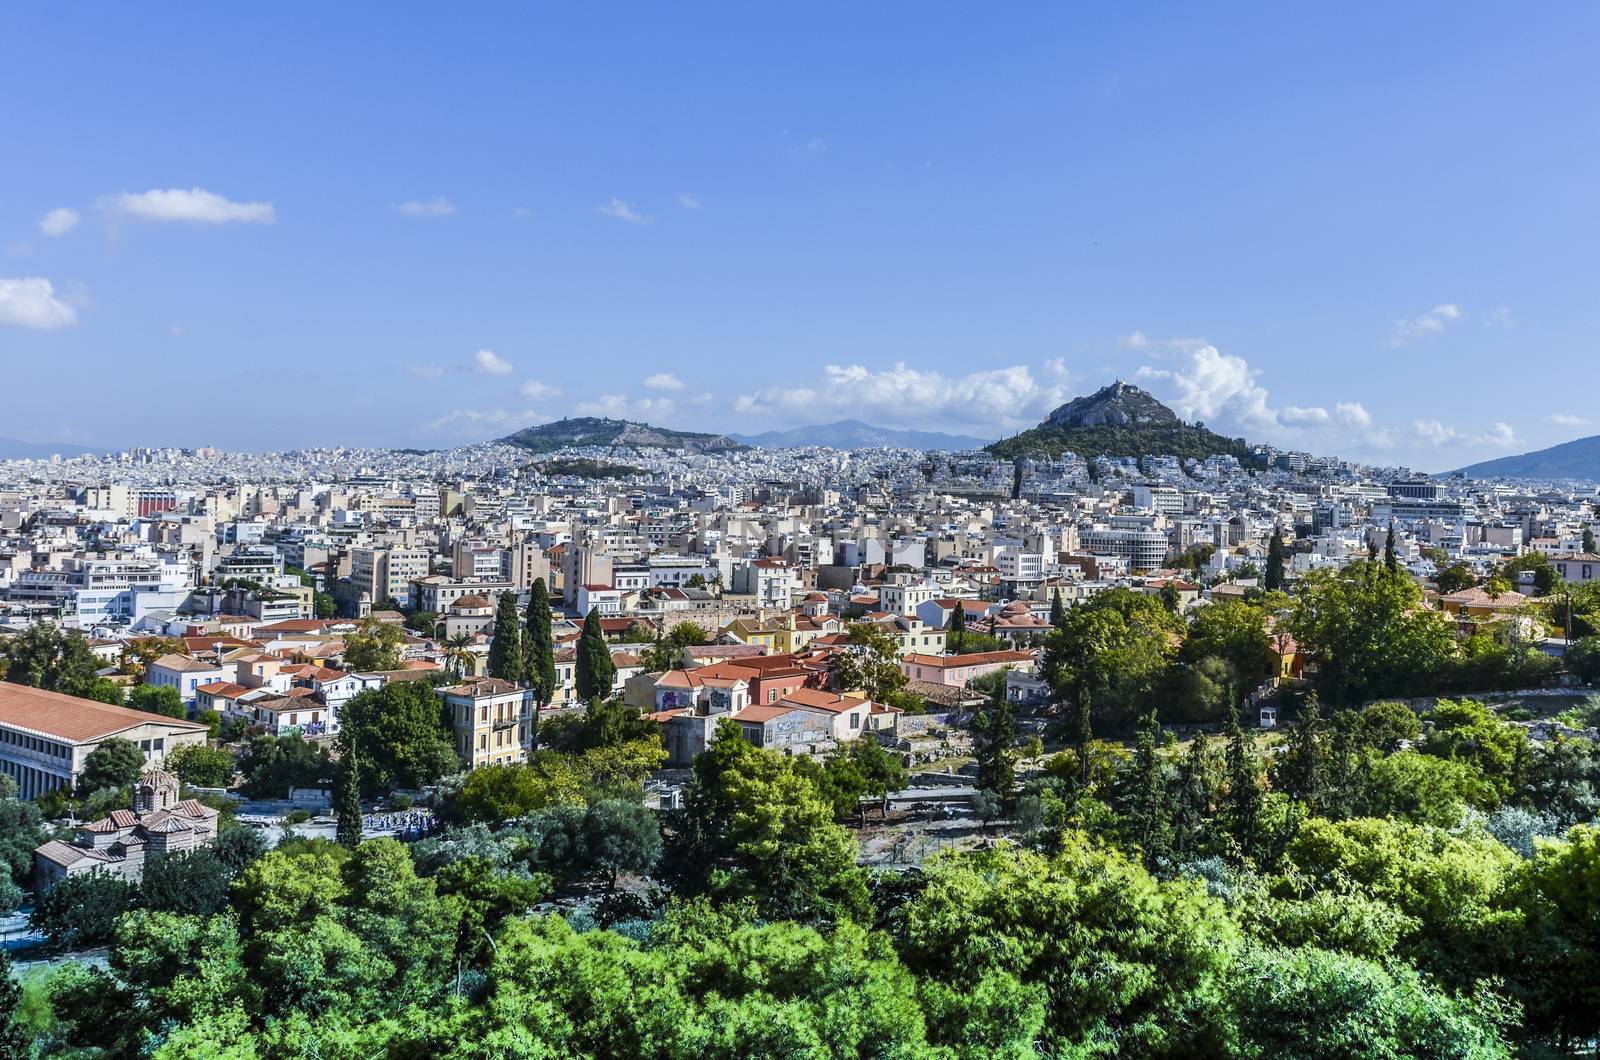 Panoramic view of the city of Athens from the hill of Philopappos in which Mount Lycabettus stands the tallest of Athens